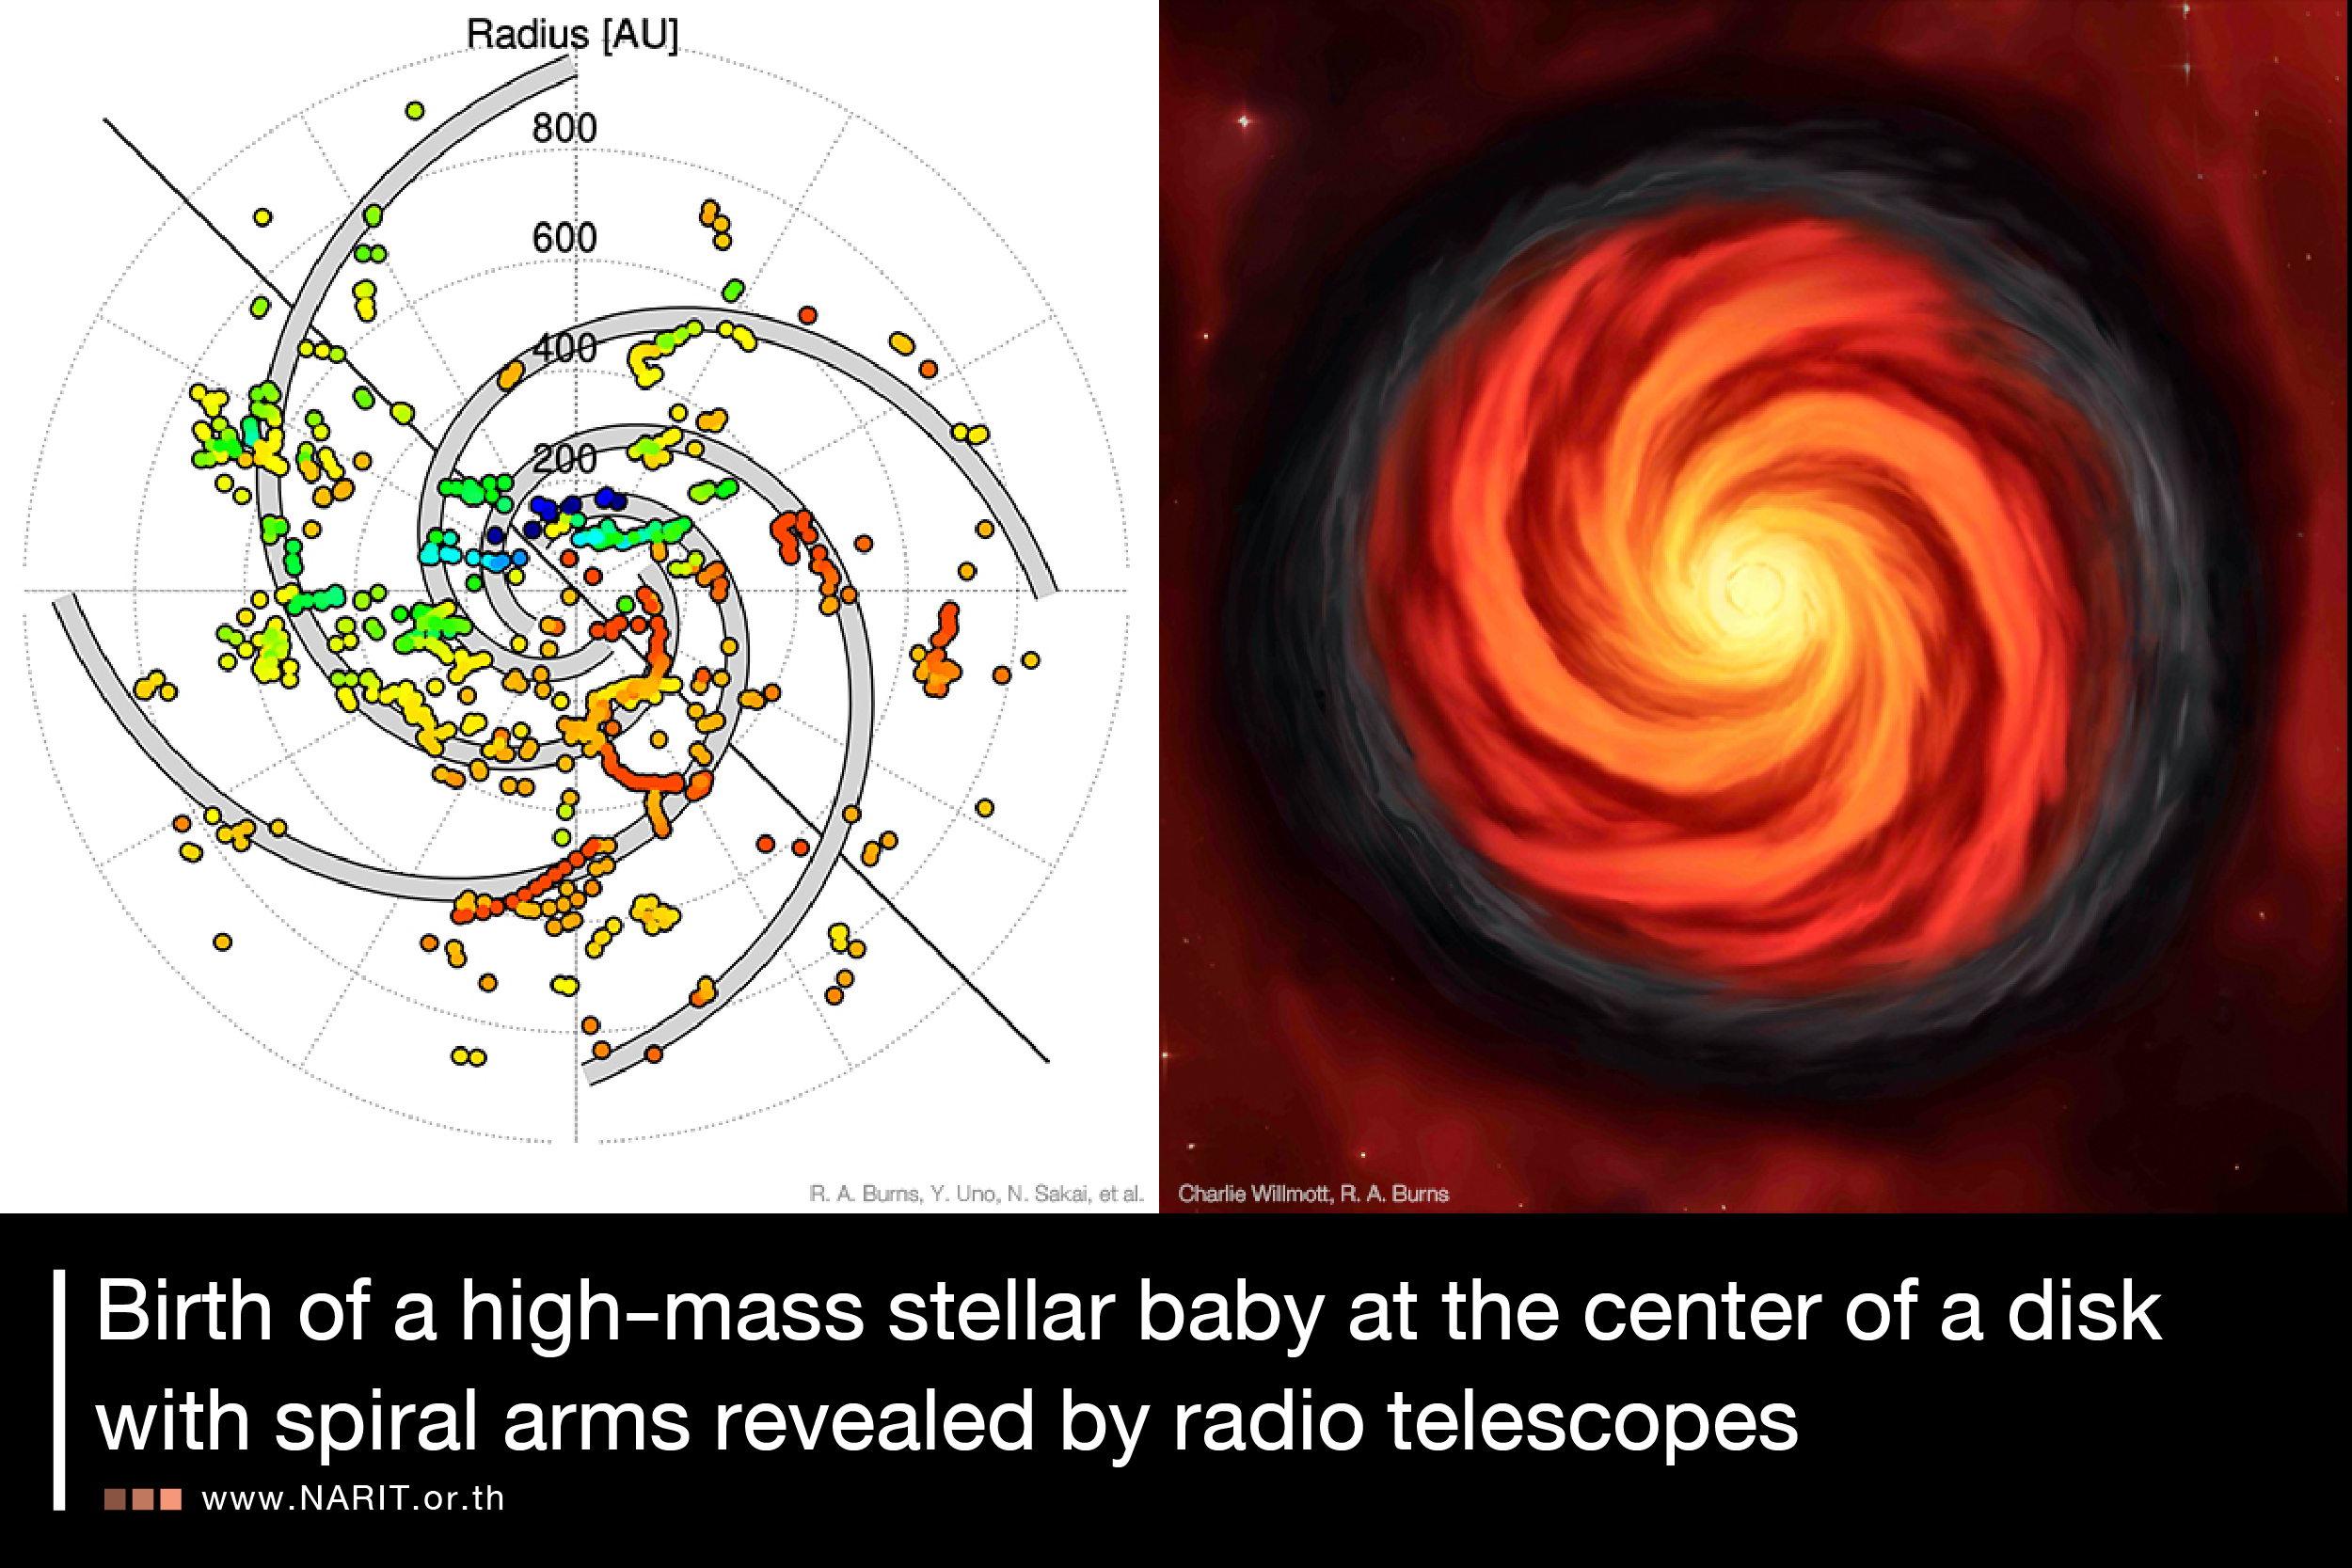 Birth of a high-mass stellar baby at the center of a disk with spiral arms revealed by radio telescopes